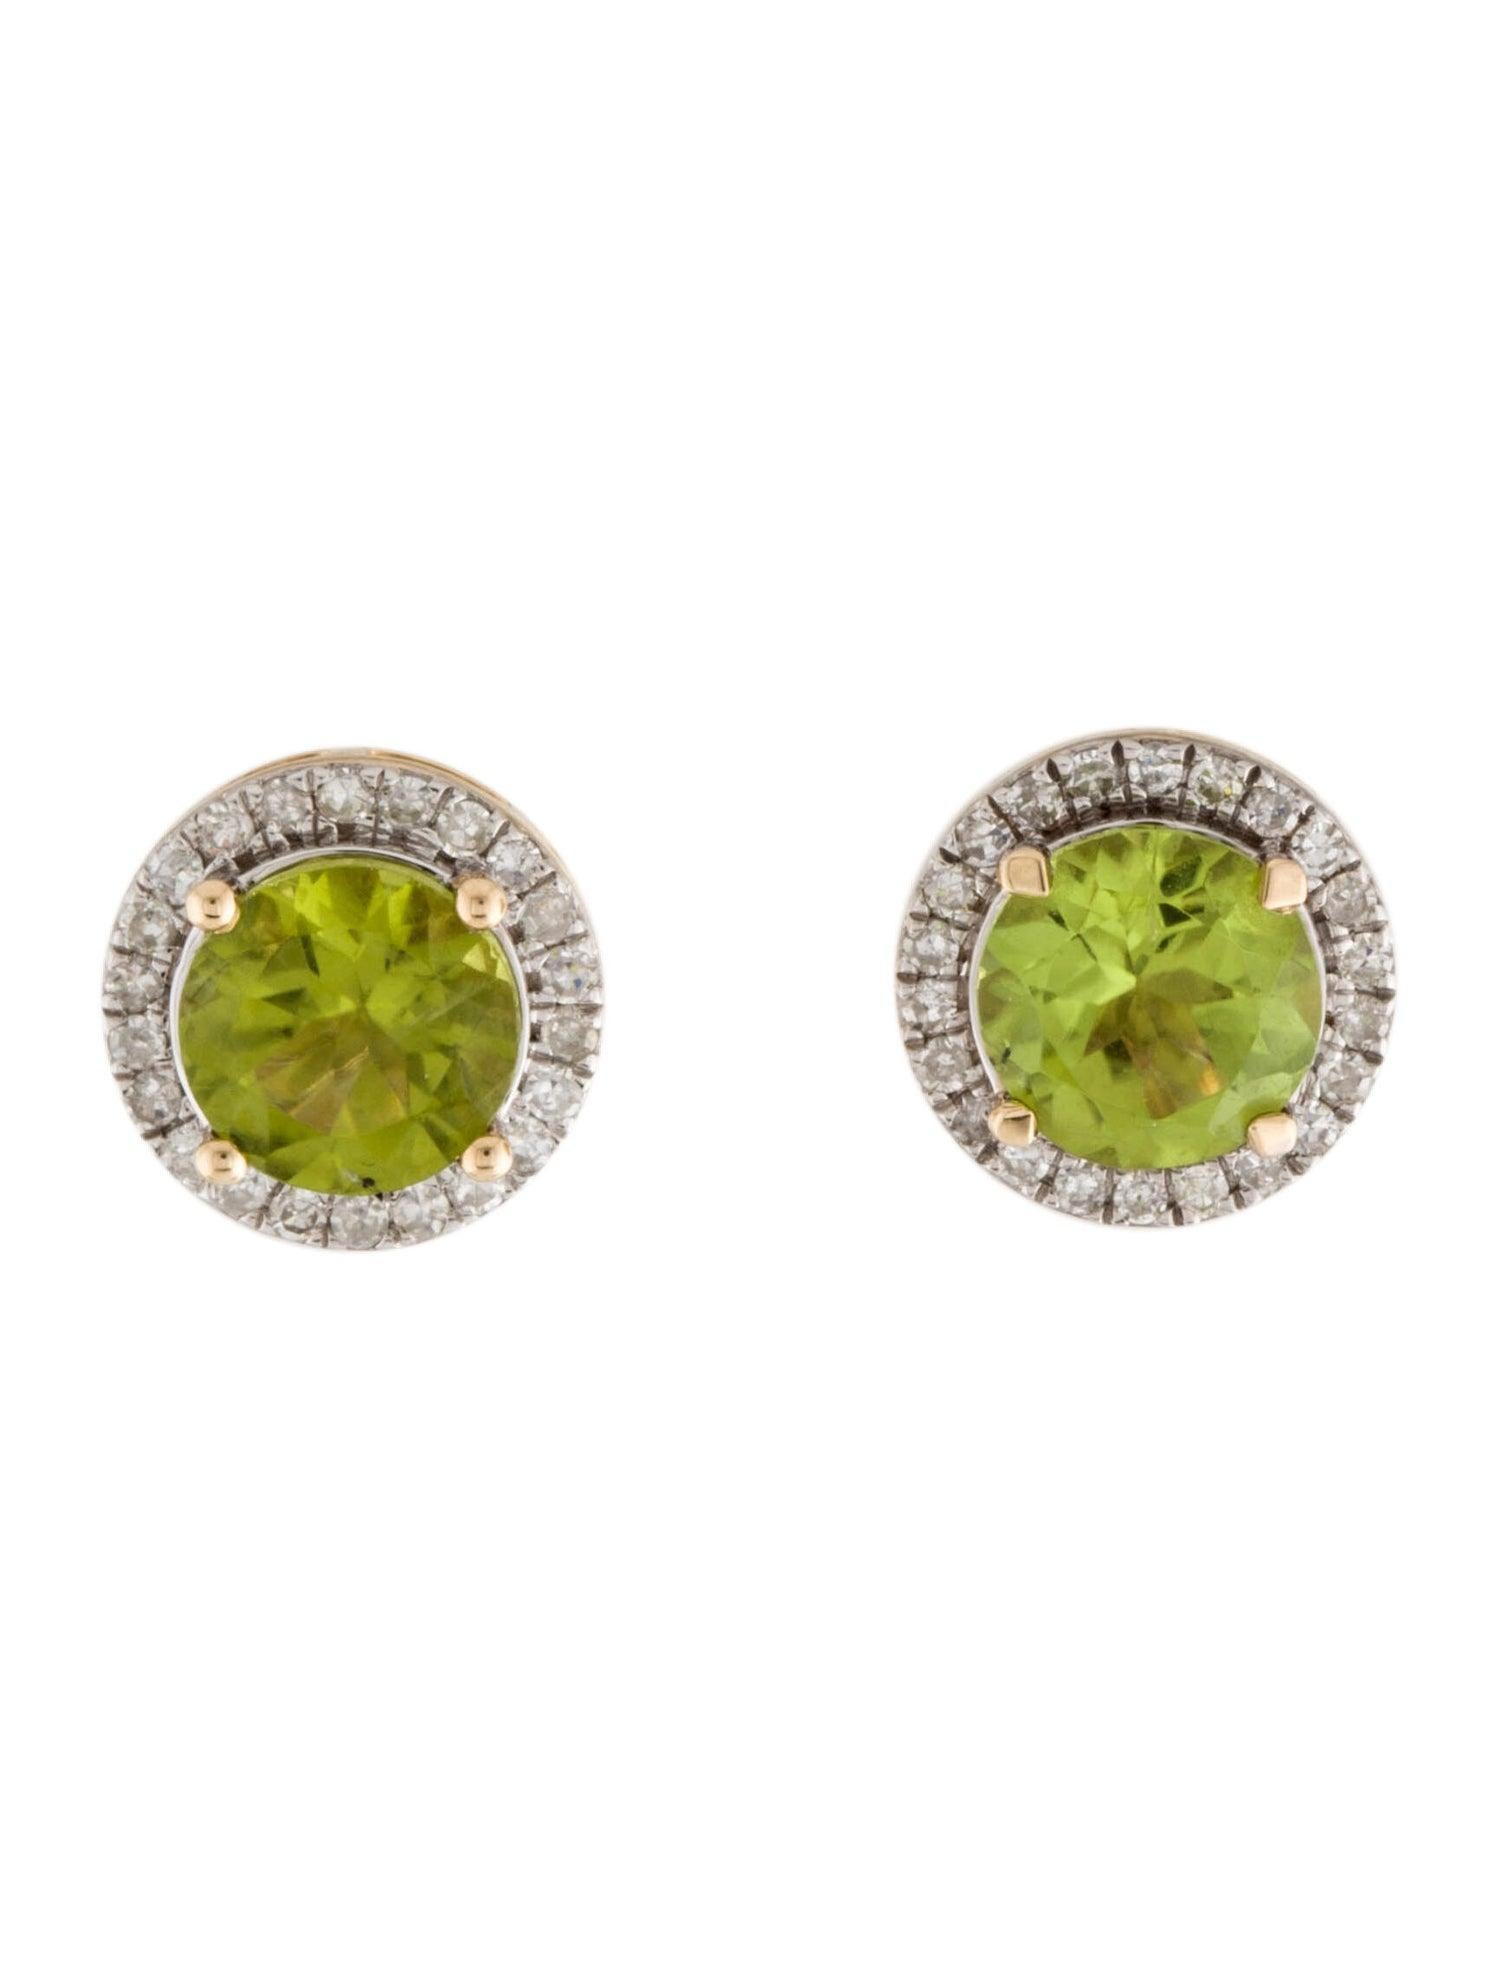 Exquisite 14K 2.70ctw Peridot & Diamond Halo Stud Earrings - Gemstone Elegance In New Condition For Sale In Holtsville, NY